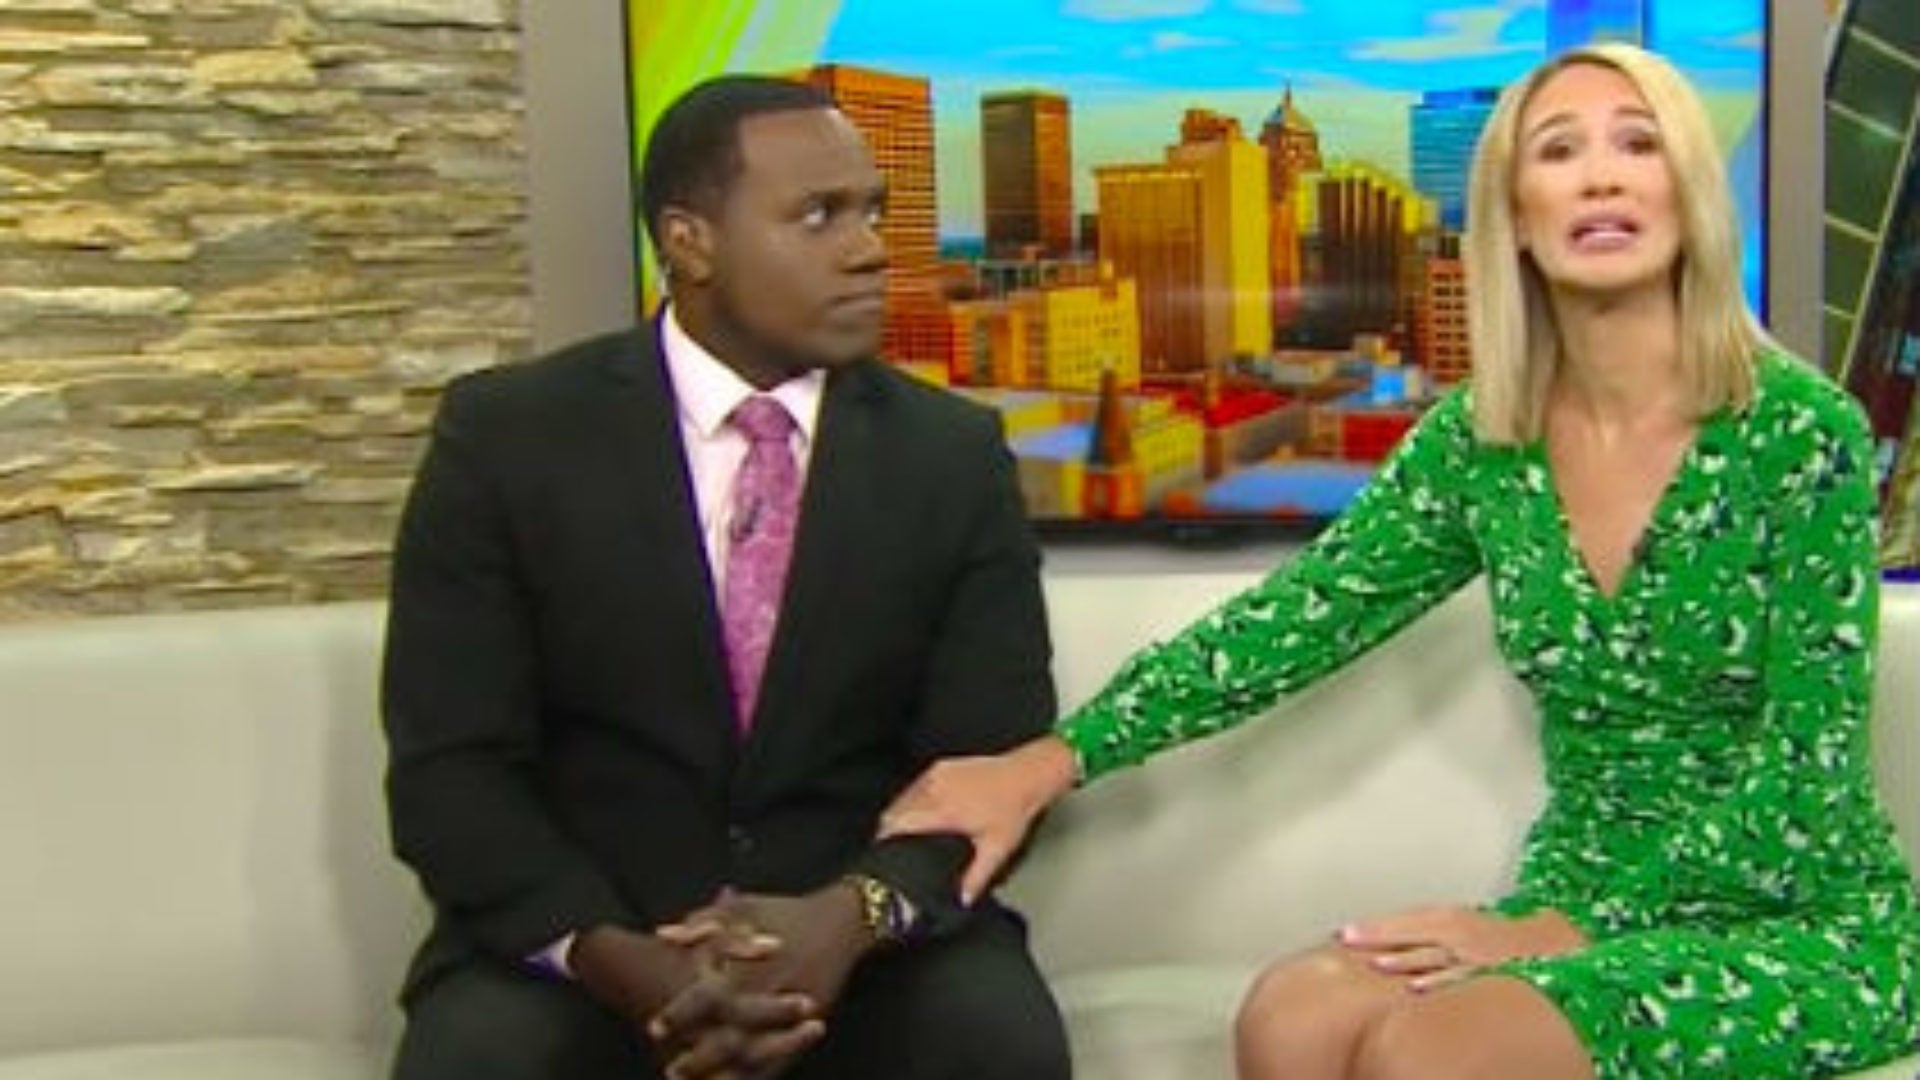 Black News Anchor Compared To Gorilla On Live TV By White Colleague